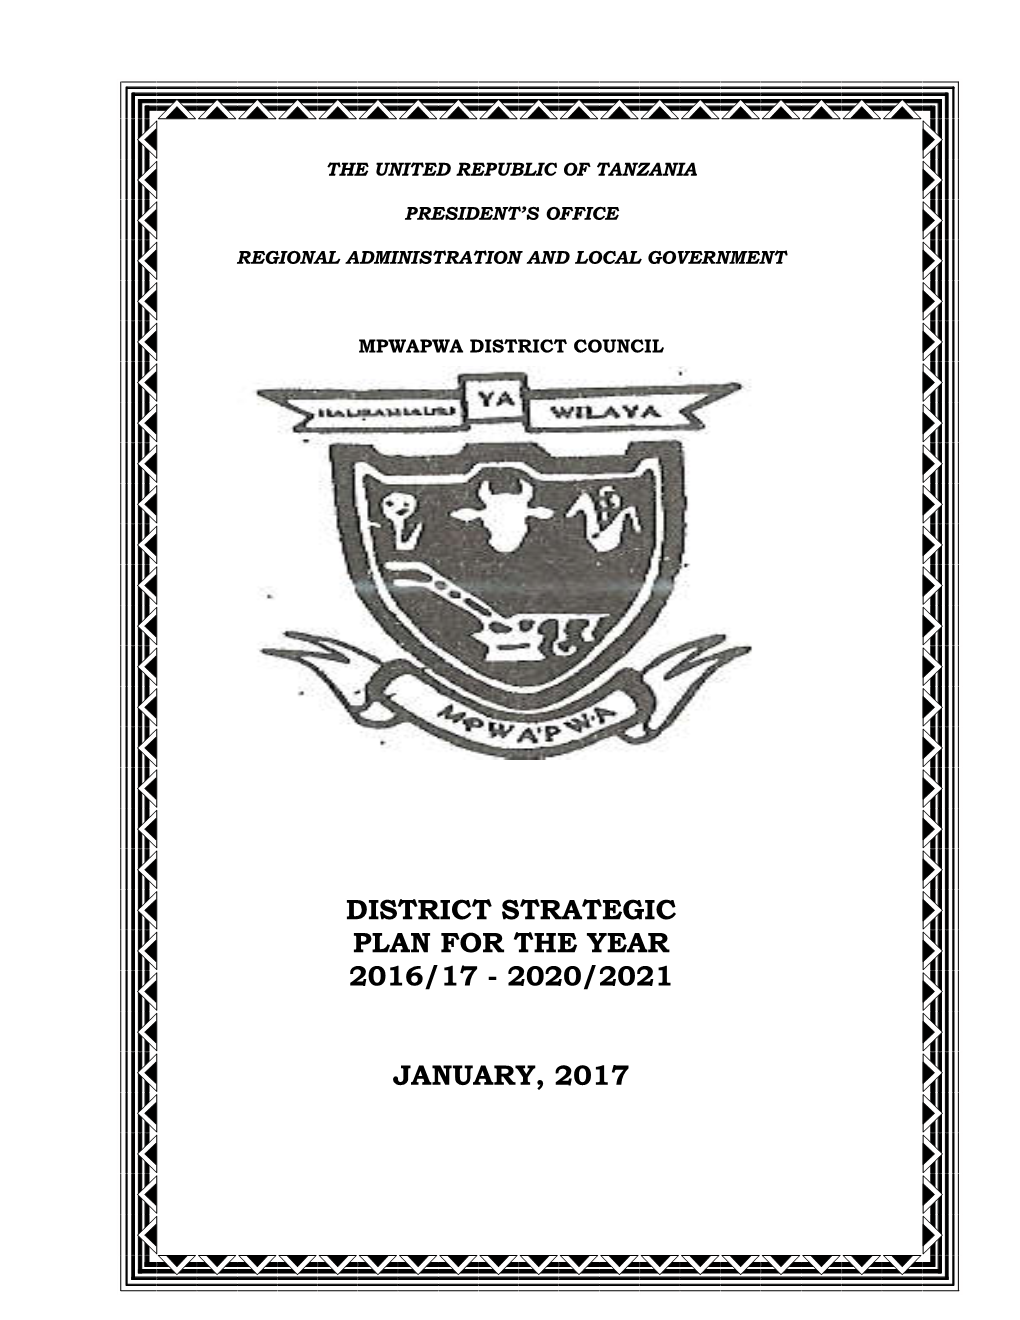 District Strategic Plan for the Year 2016/17 - 2020/2021